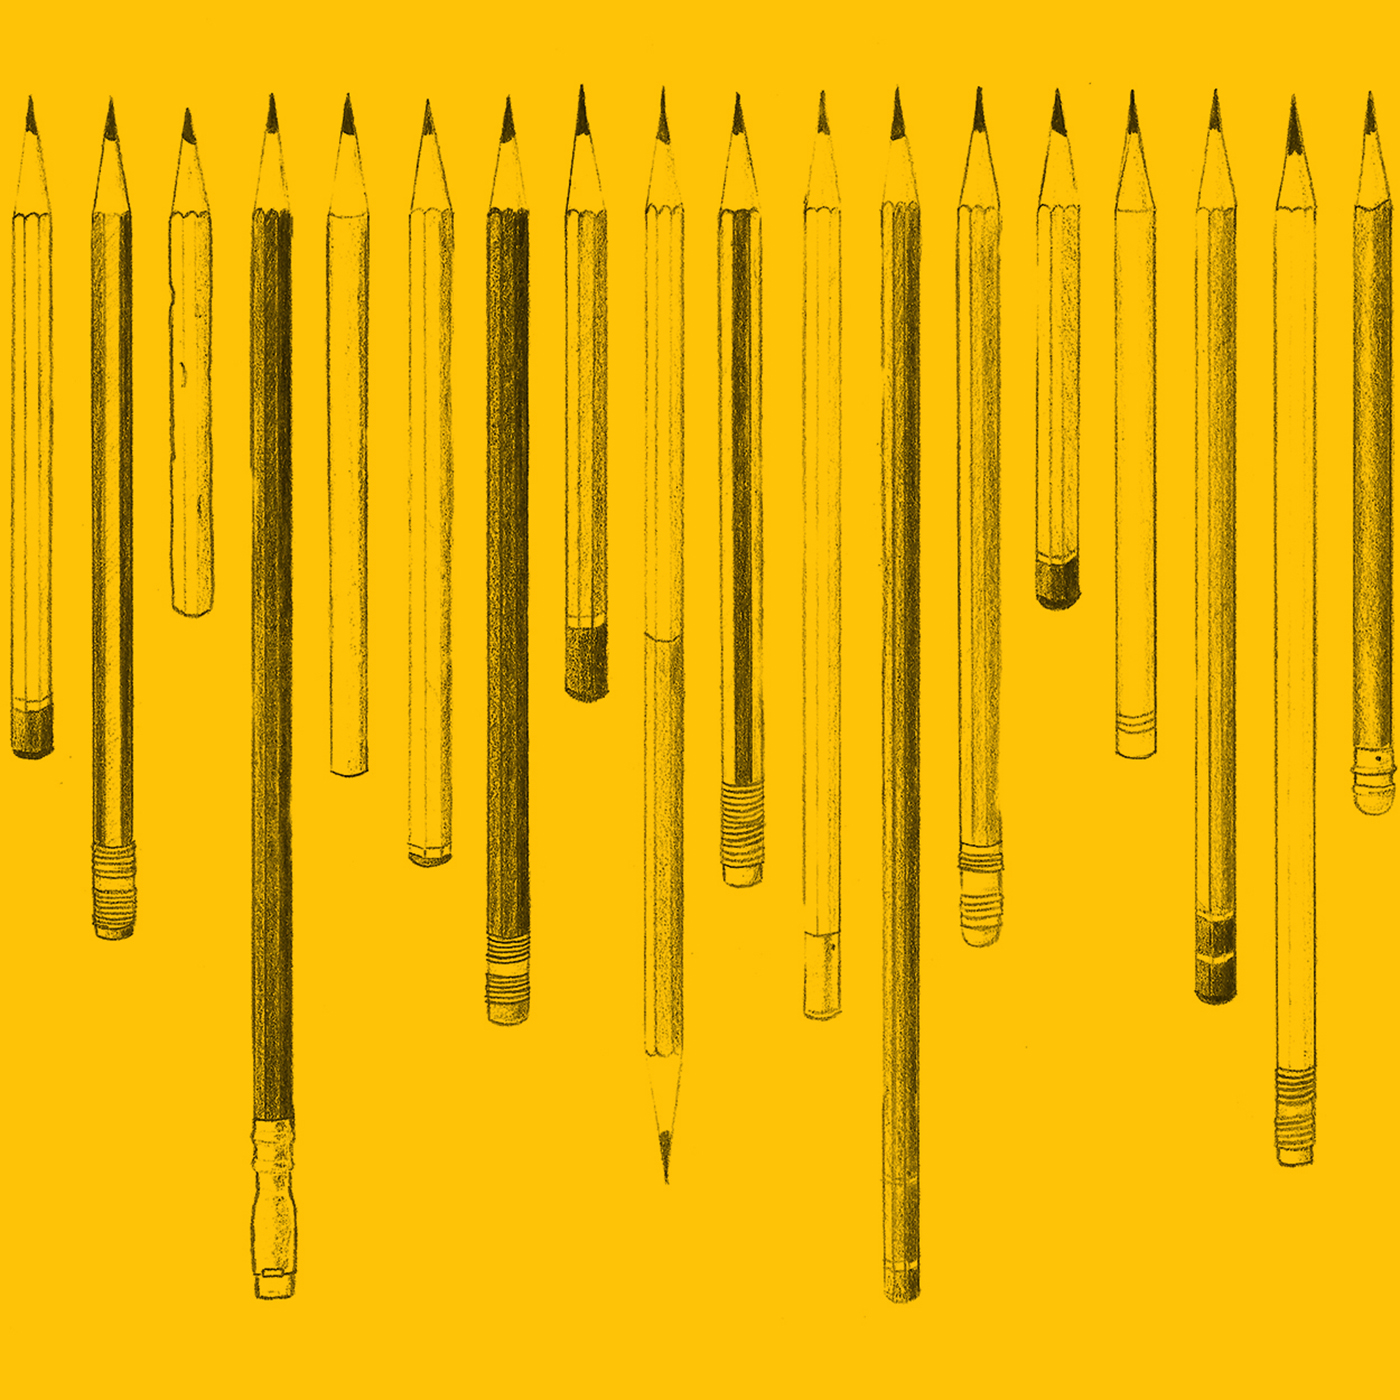 Yellow illustration of pencils of various lengths lined up next to each other.